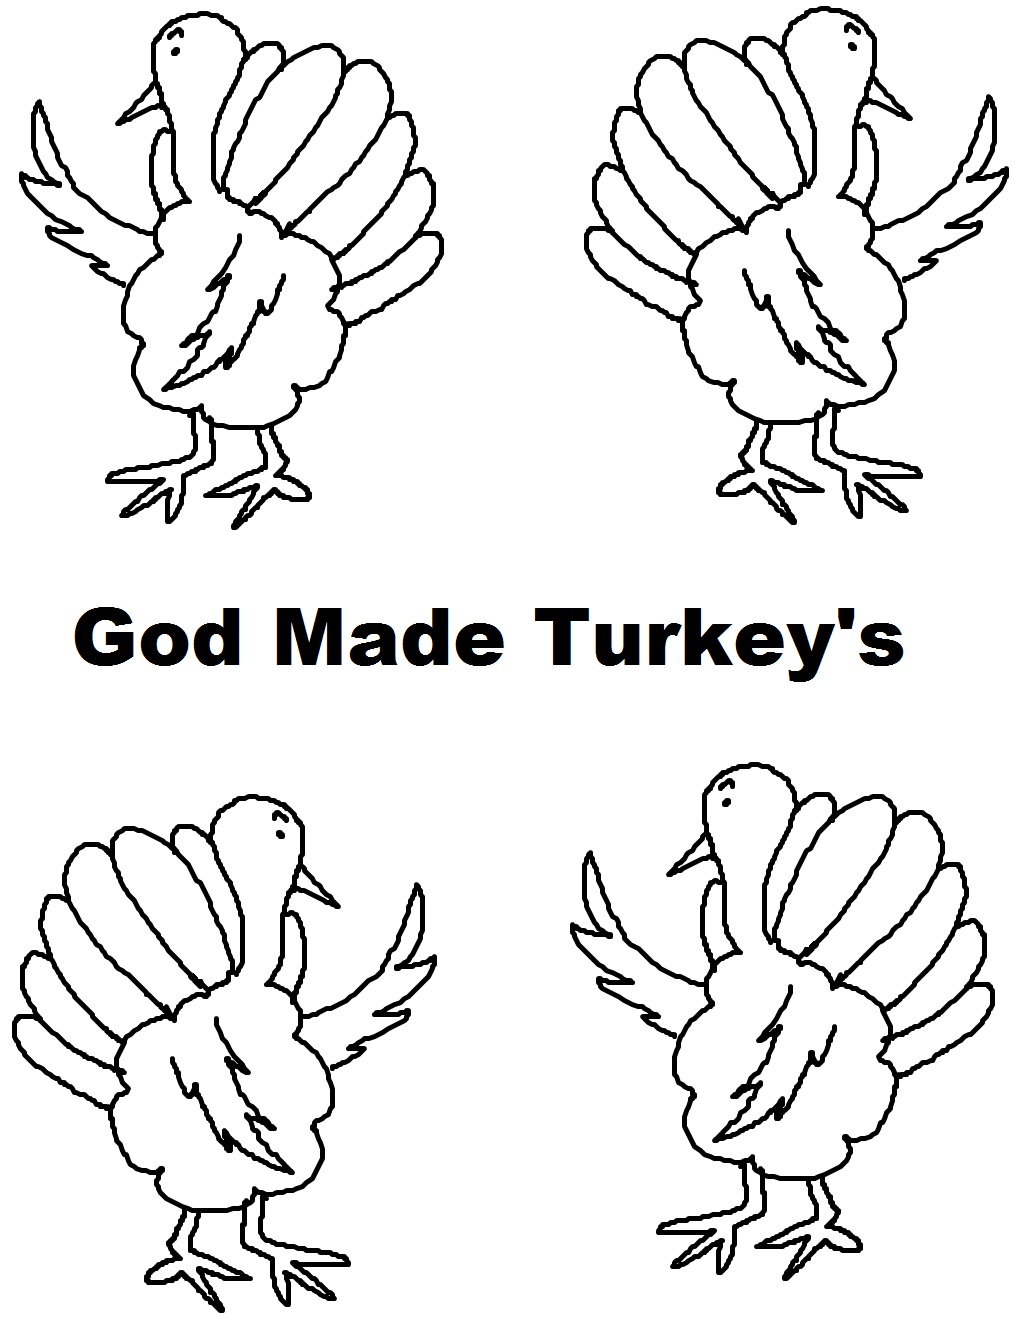 God Made Turkey s Coloring Page